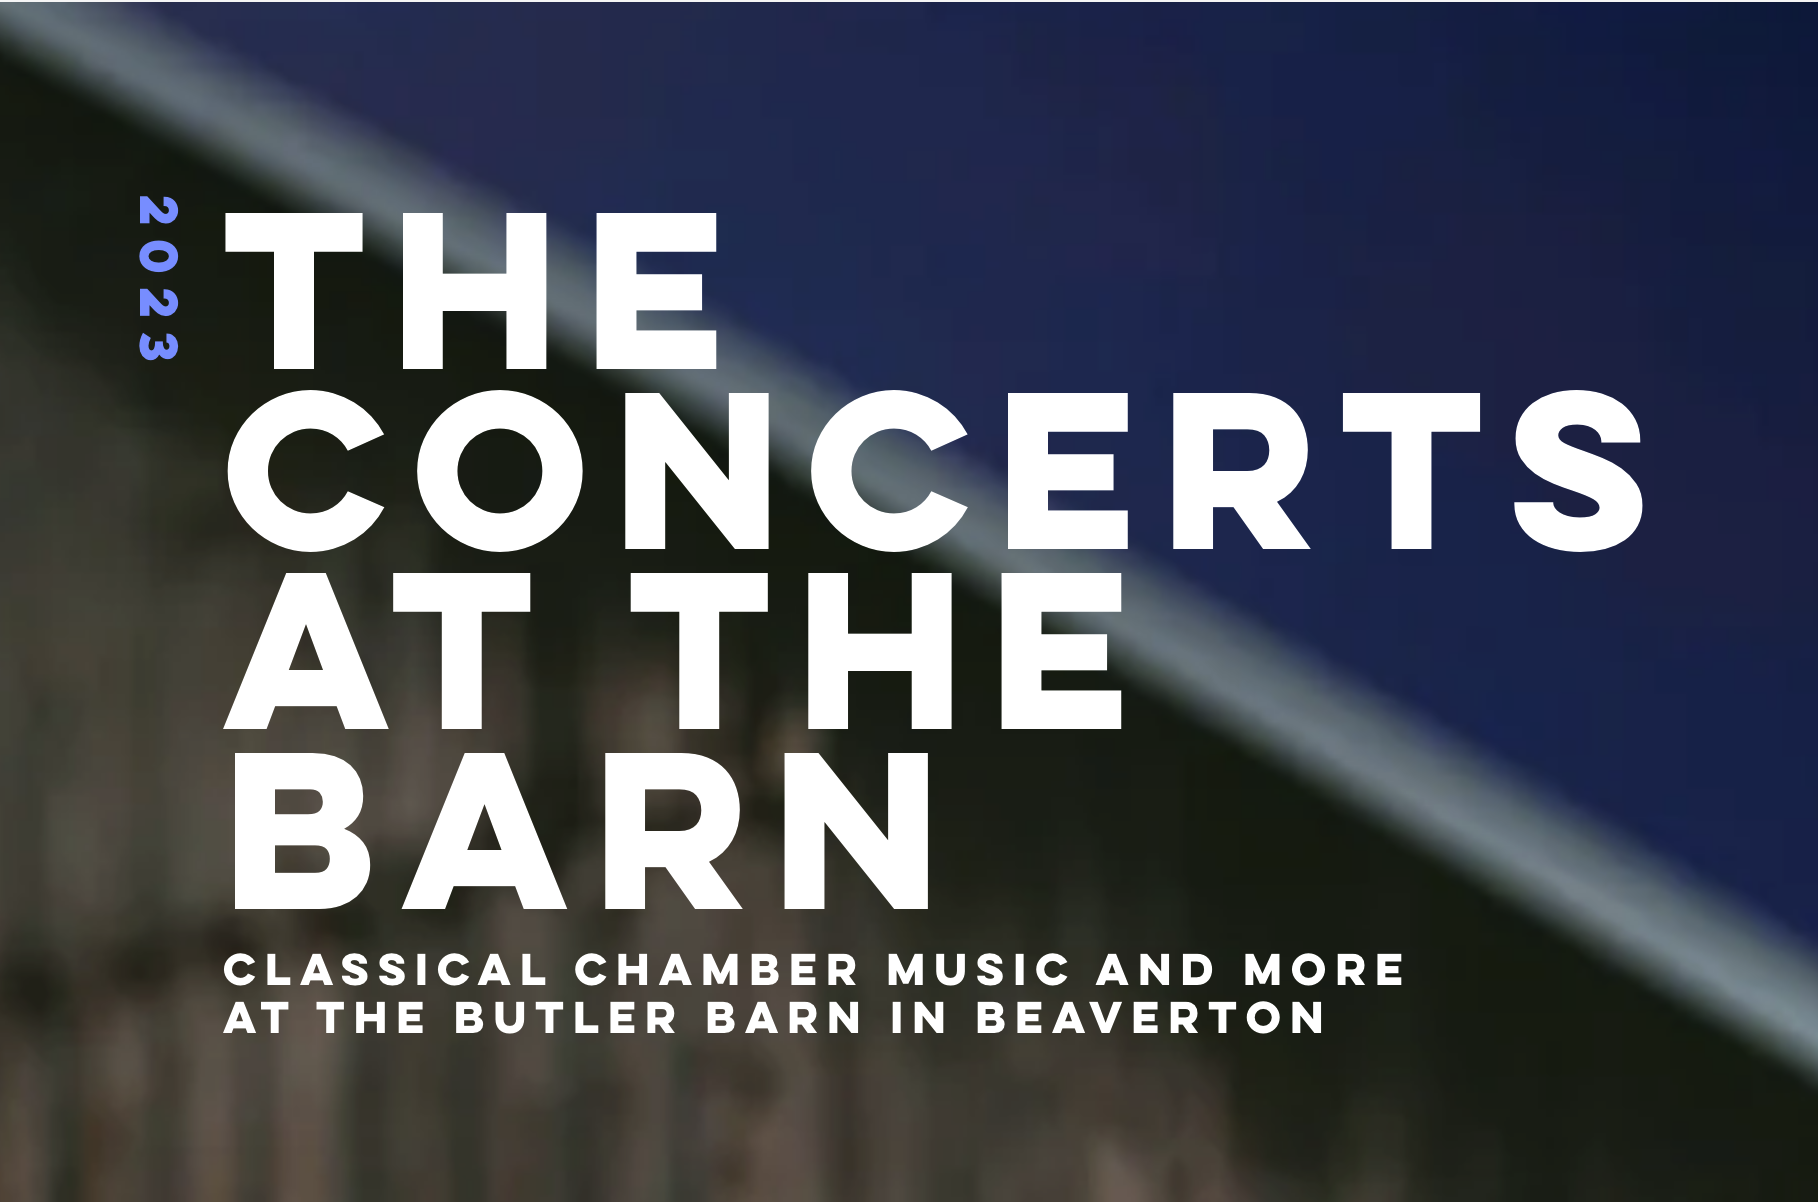 The Concerts at The Barn, 2023. Classical chamber music and more at the Butler Barn in Beaverton